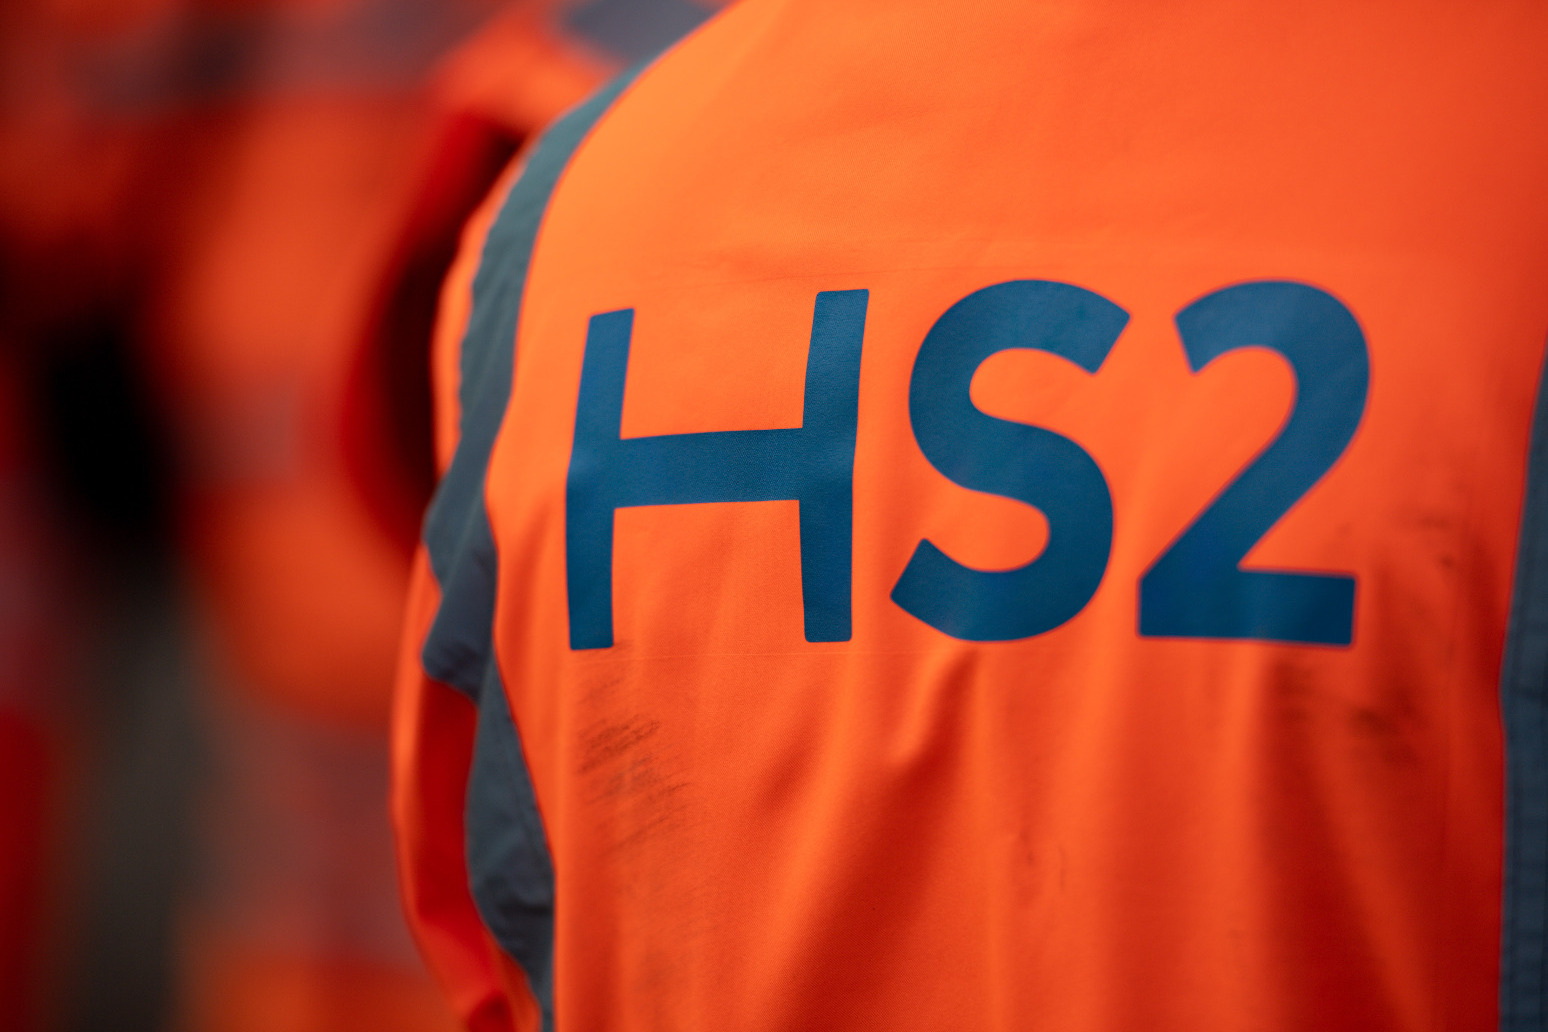 Parts of the HS2 rail link are set to be delayed 